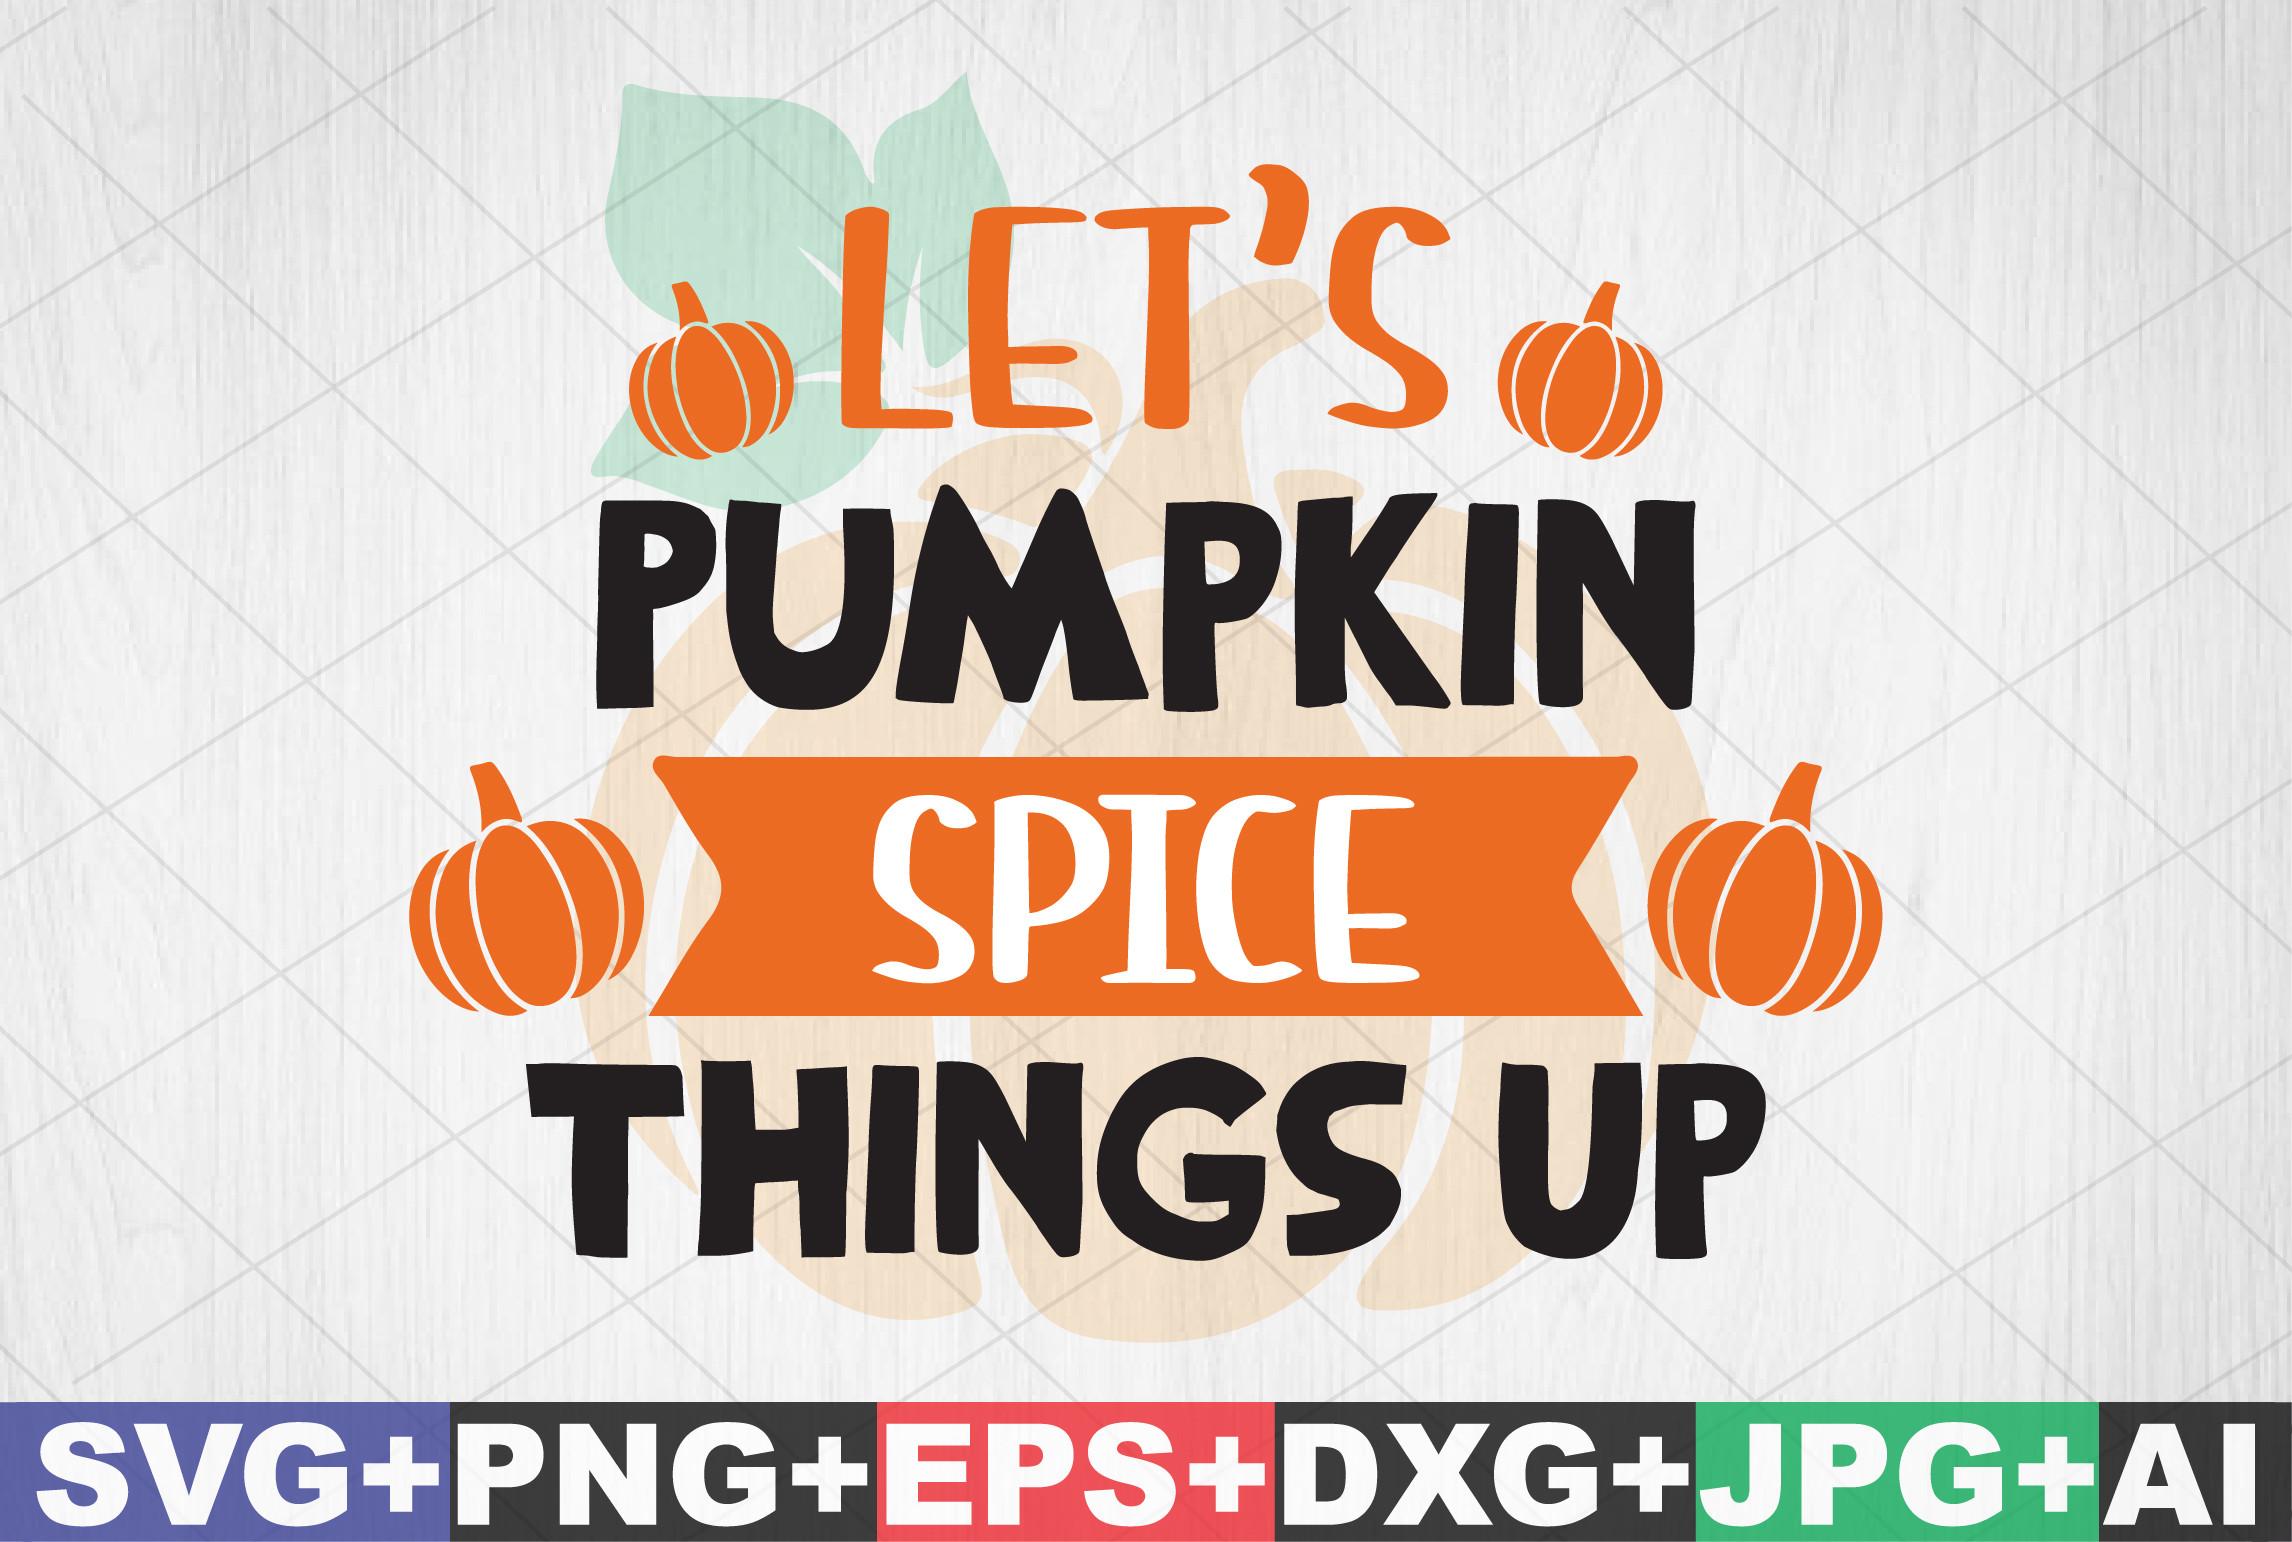 Let’s Pumpkin Spice Things Up